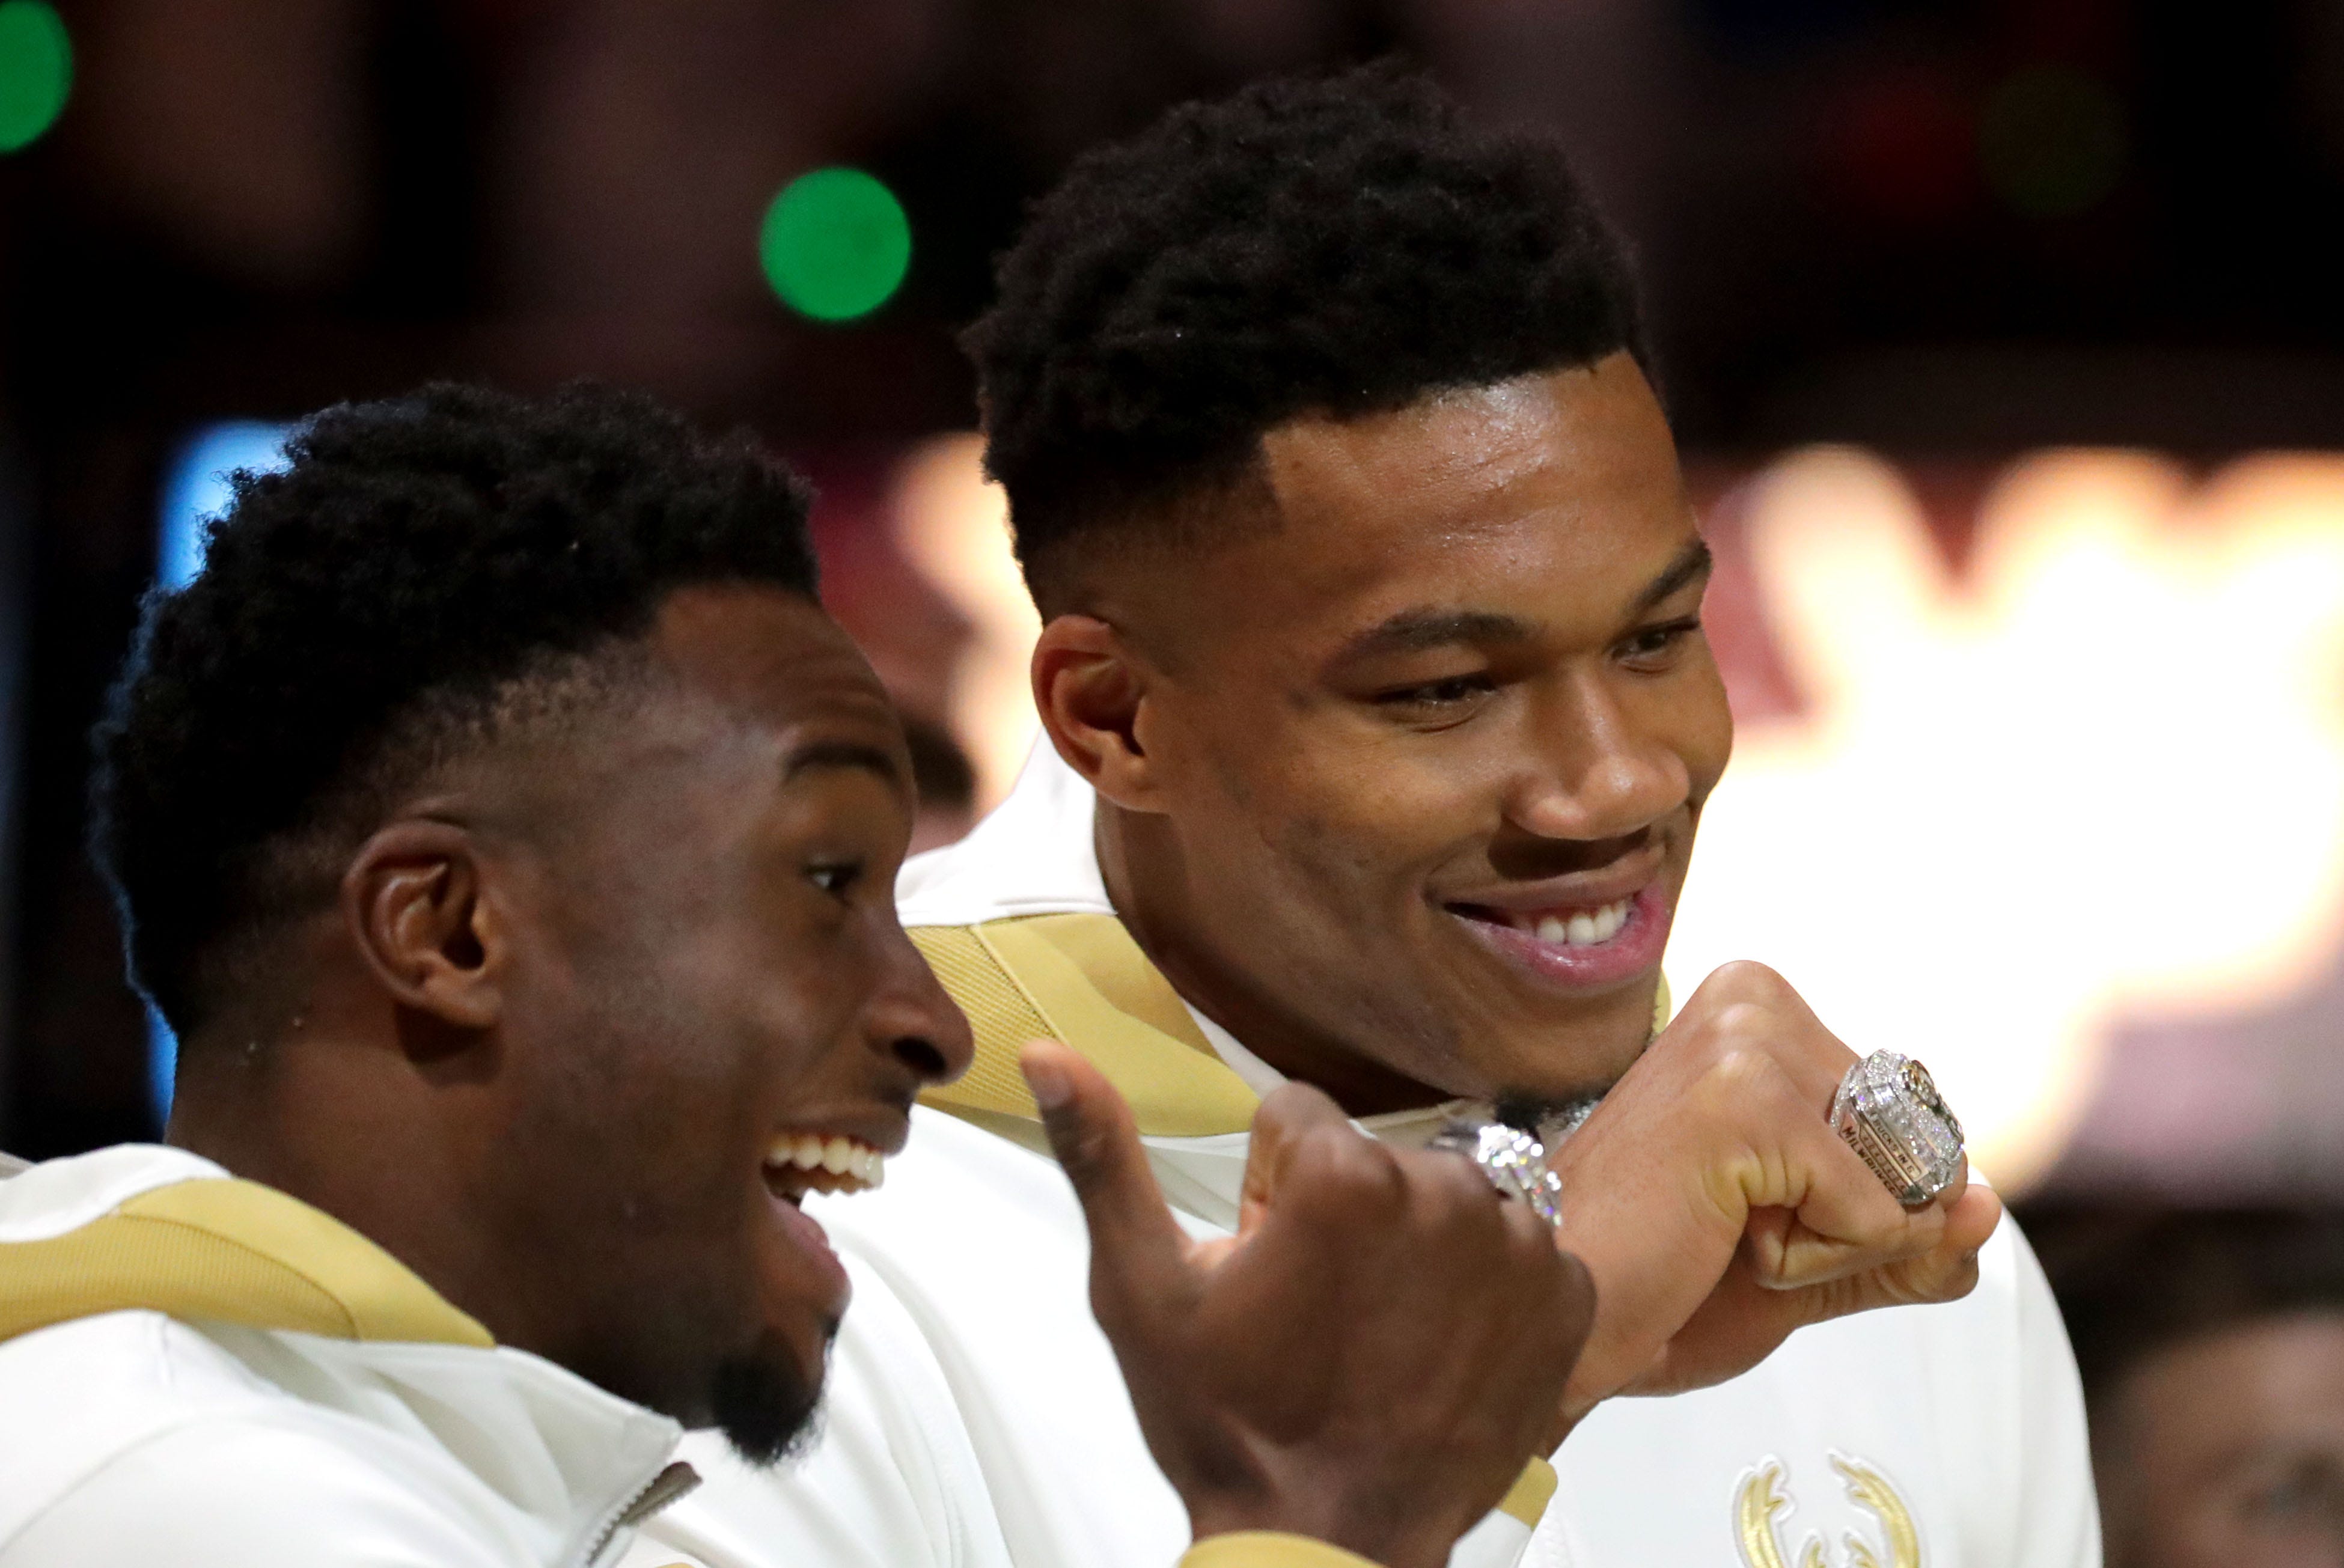 Giannis Antetokounmpo, right, and older brother Thanasis show off their NBA championship rings before the 2021-22 season opener.